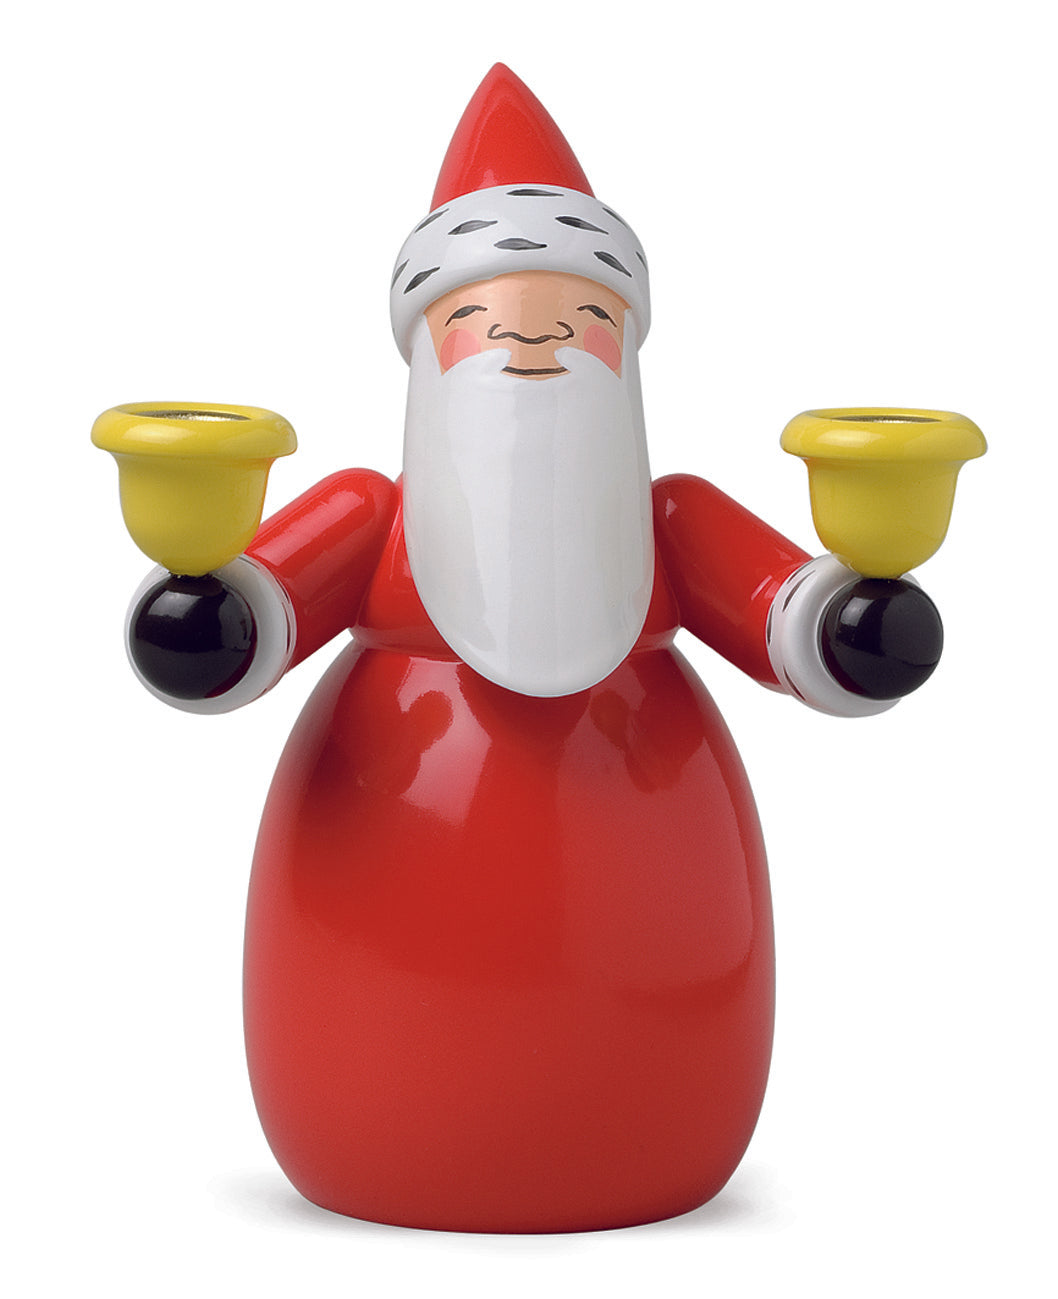 Santa Claus with candle spouts